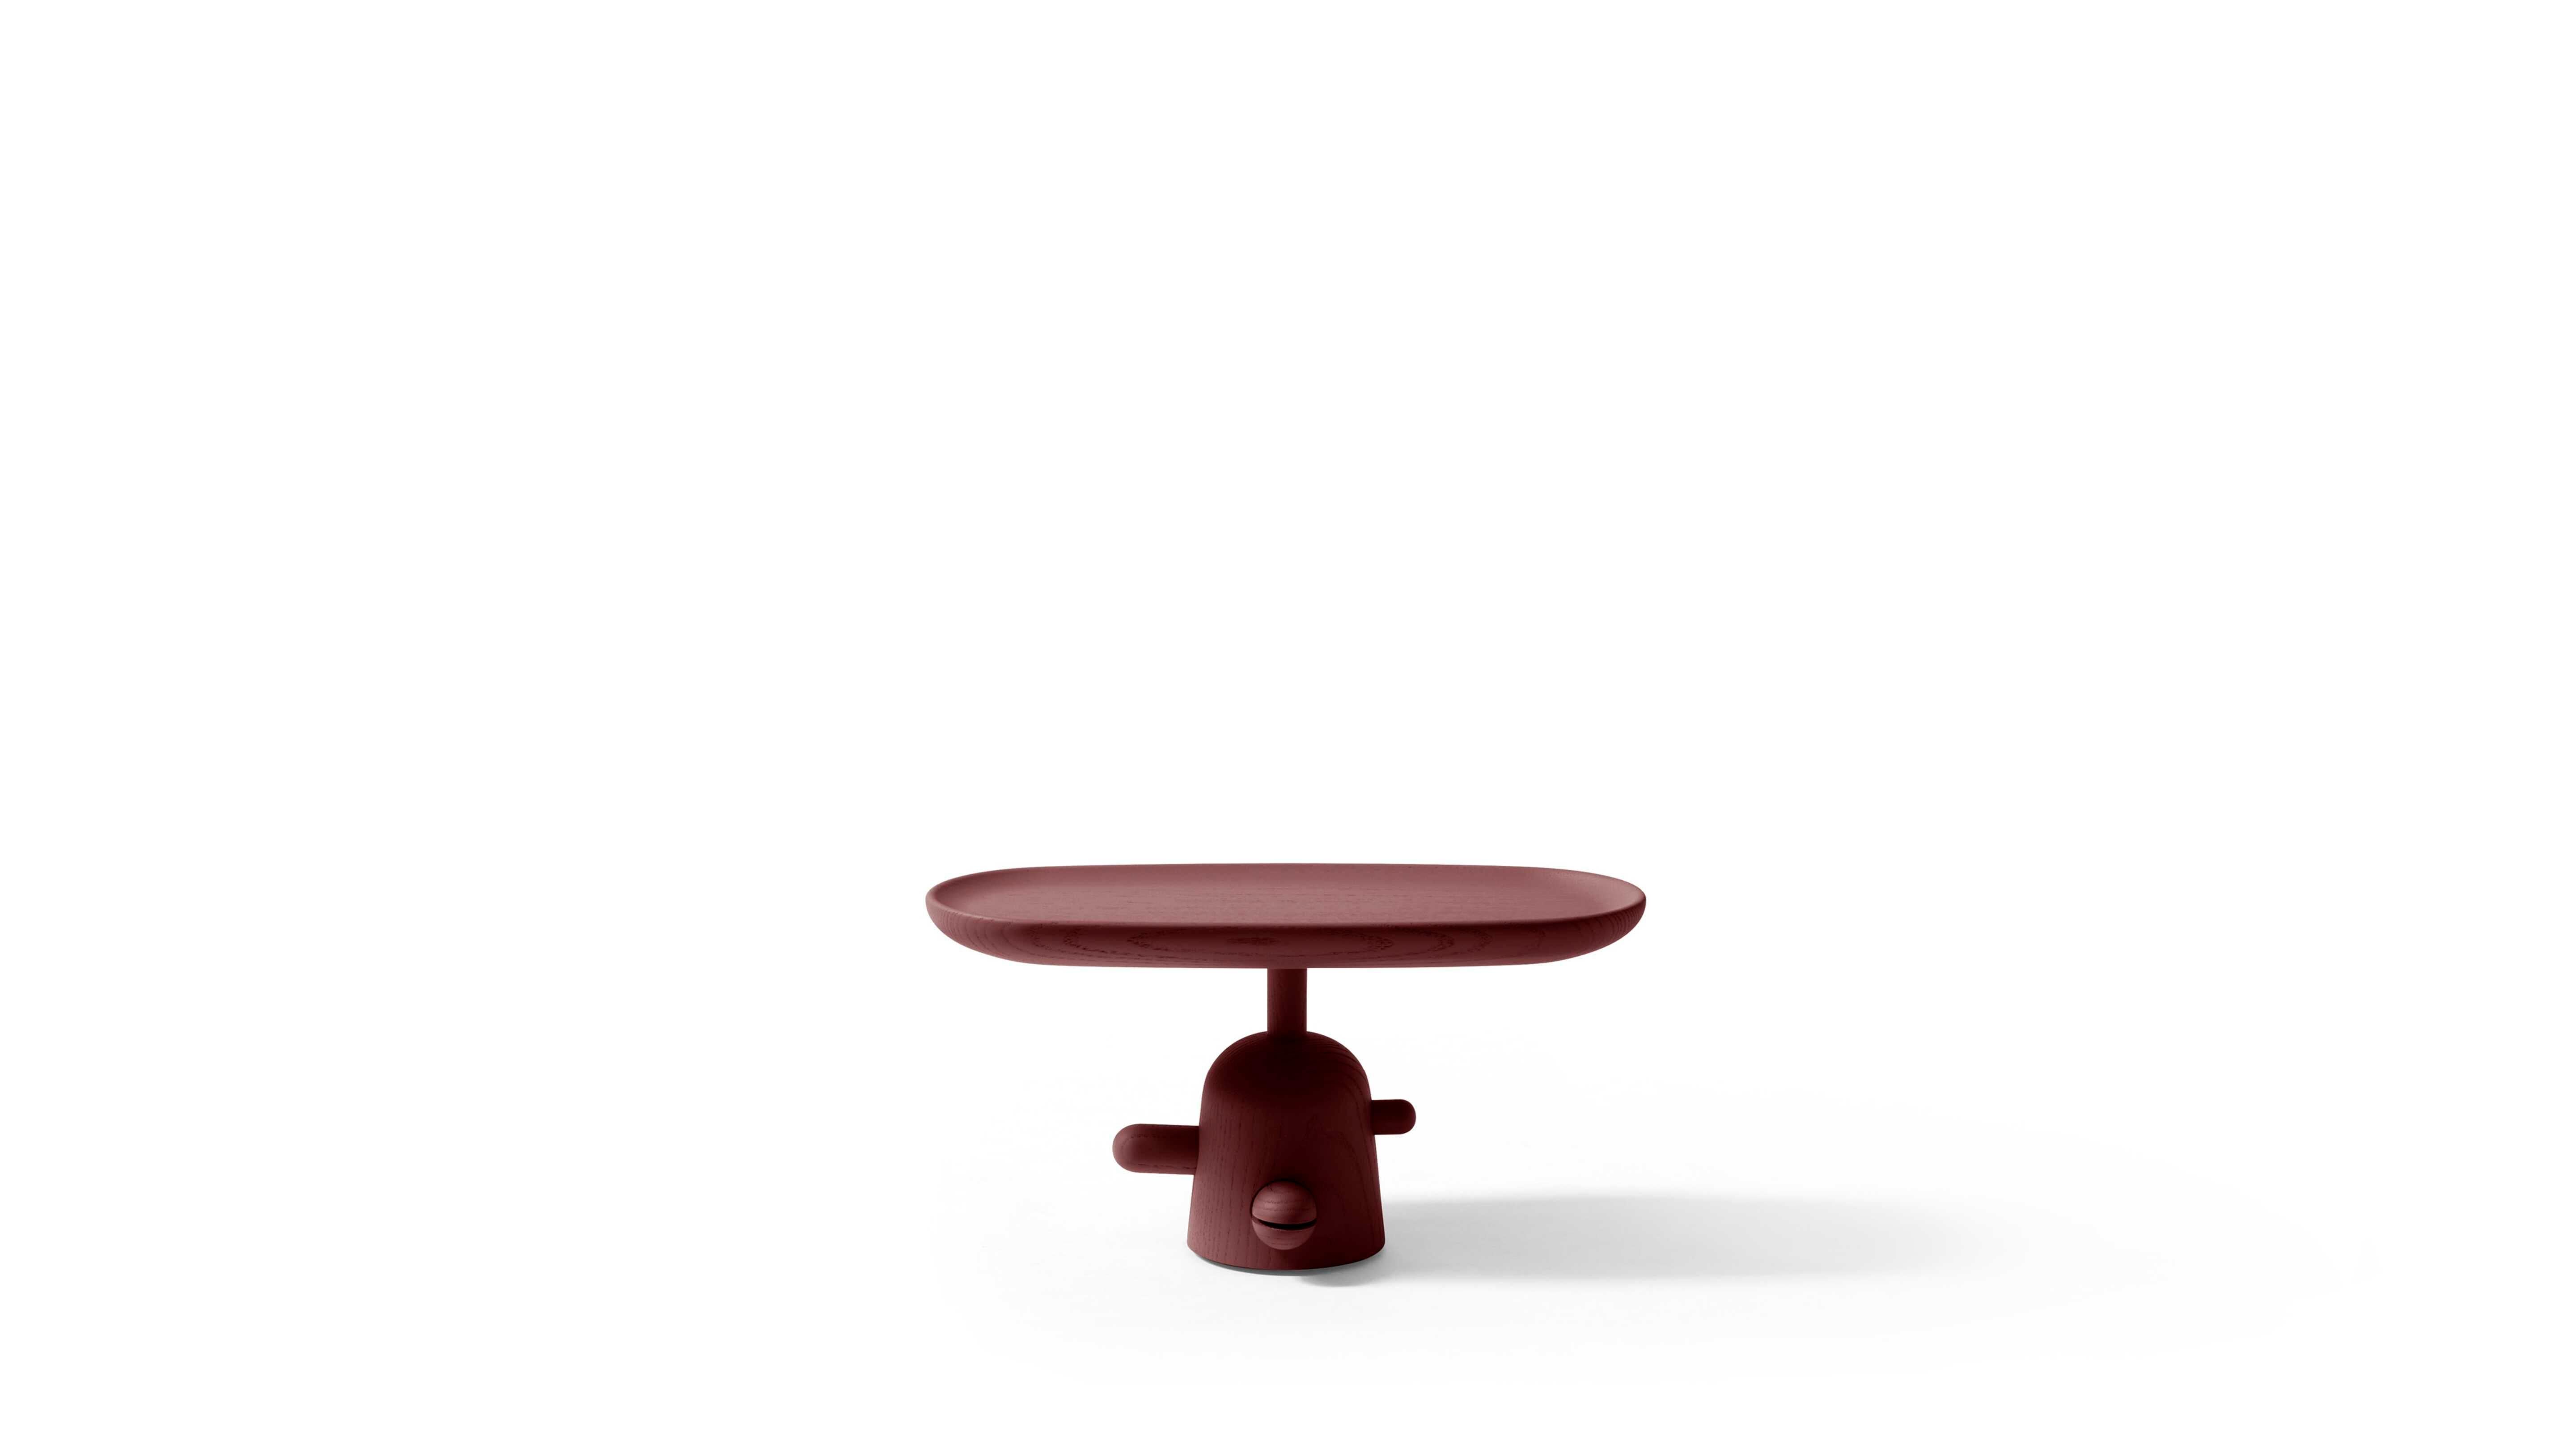 Jaime Hayon Réaction Poétique 1 of 7 decor objects for Cassina, Italy - new  For Sale 5